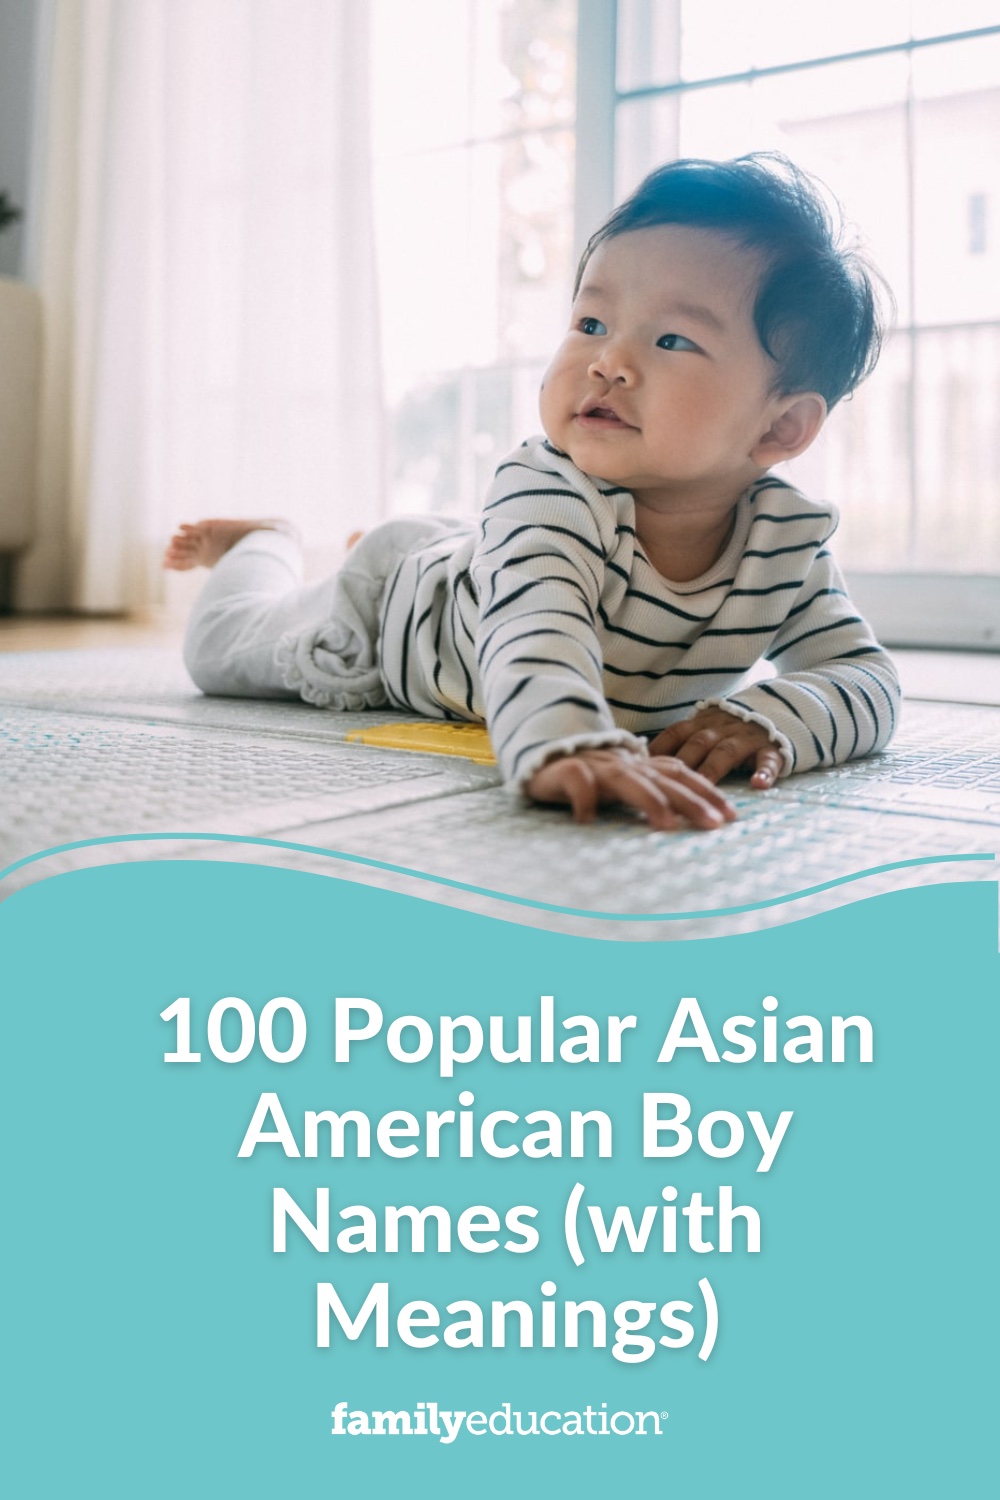 100 Popular Asian American Boy Names (with Meanings)